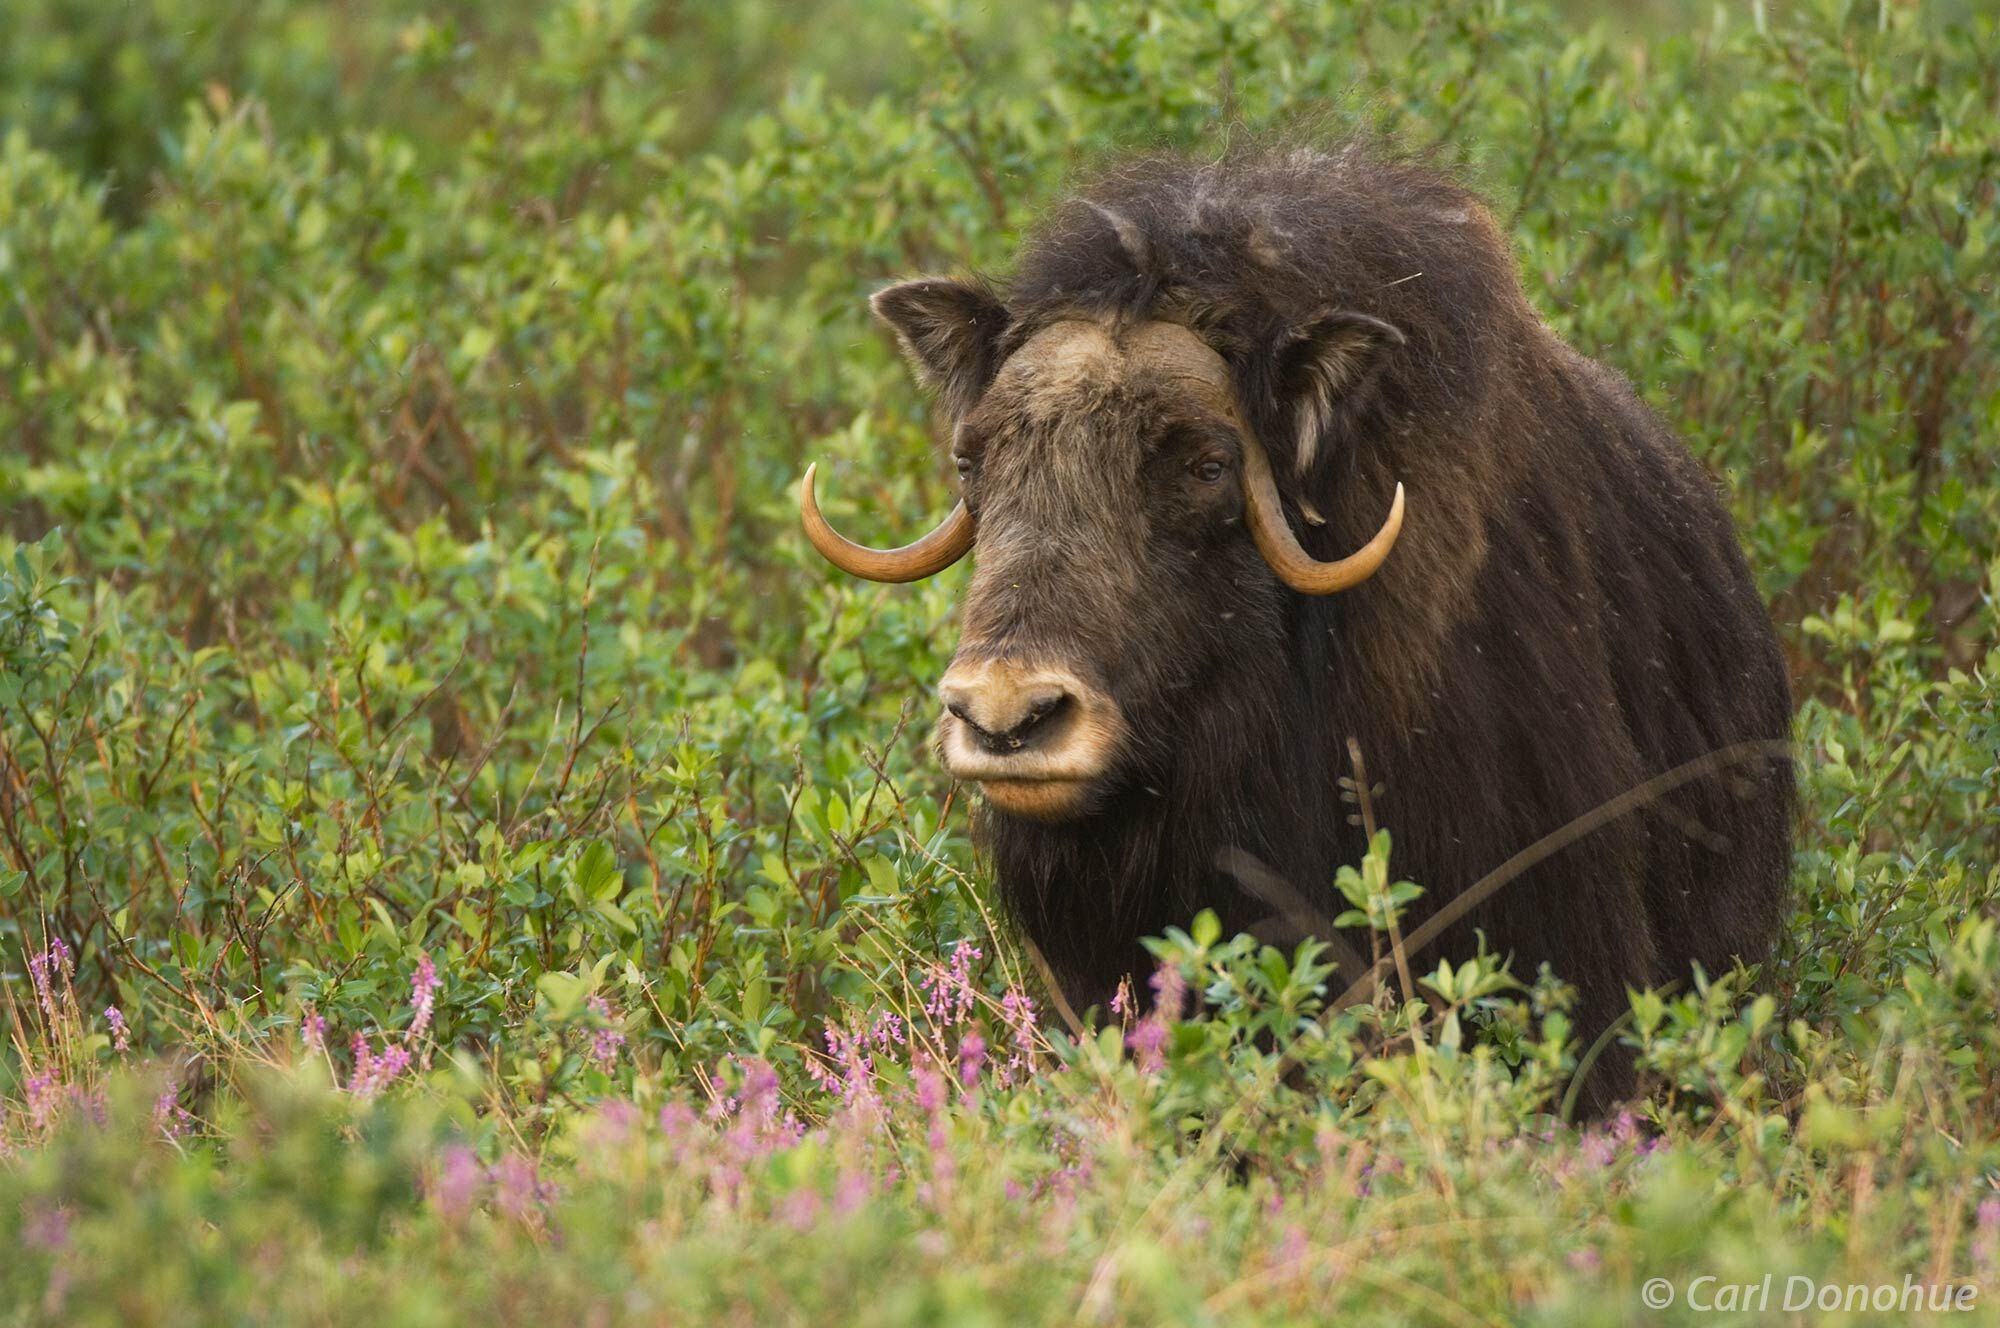 Muskoxen are a unique and majestic species that call the Arctic National Wildlife Refuge home. These sturdy creatures can withstand...